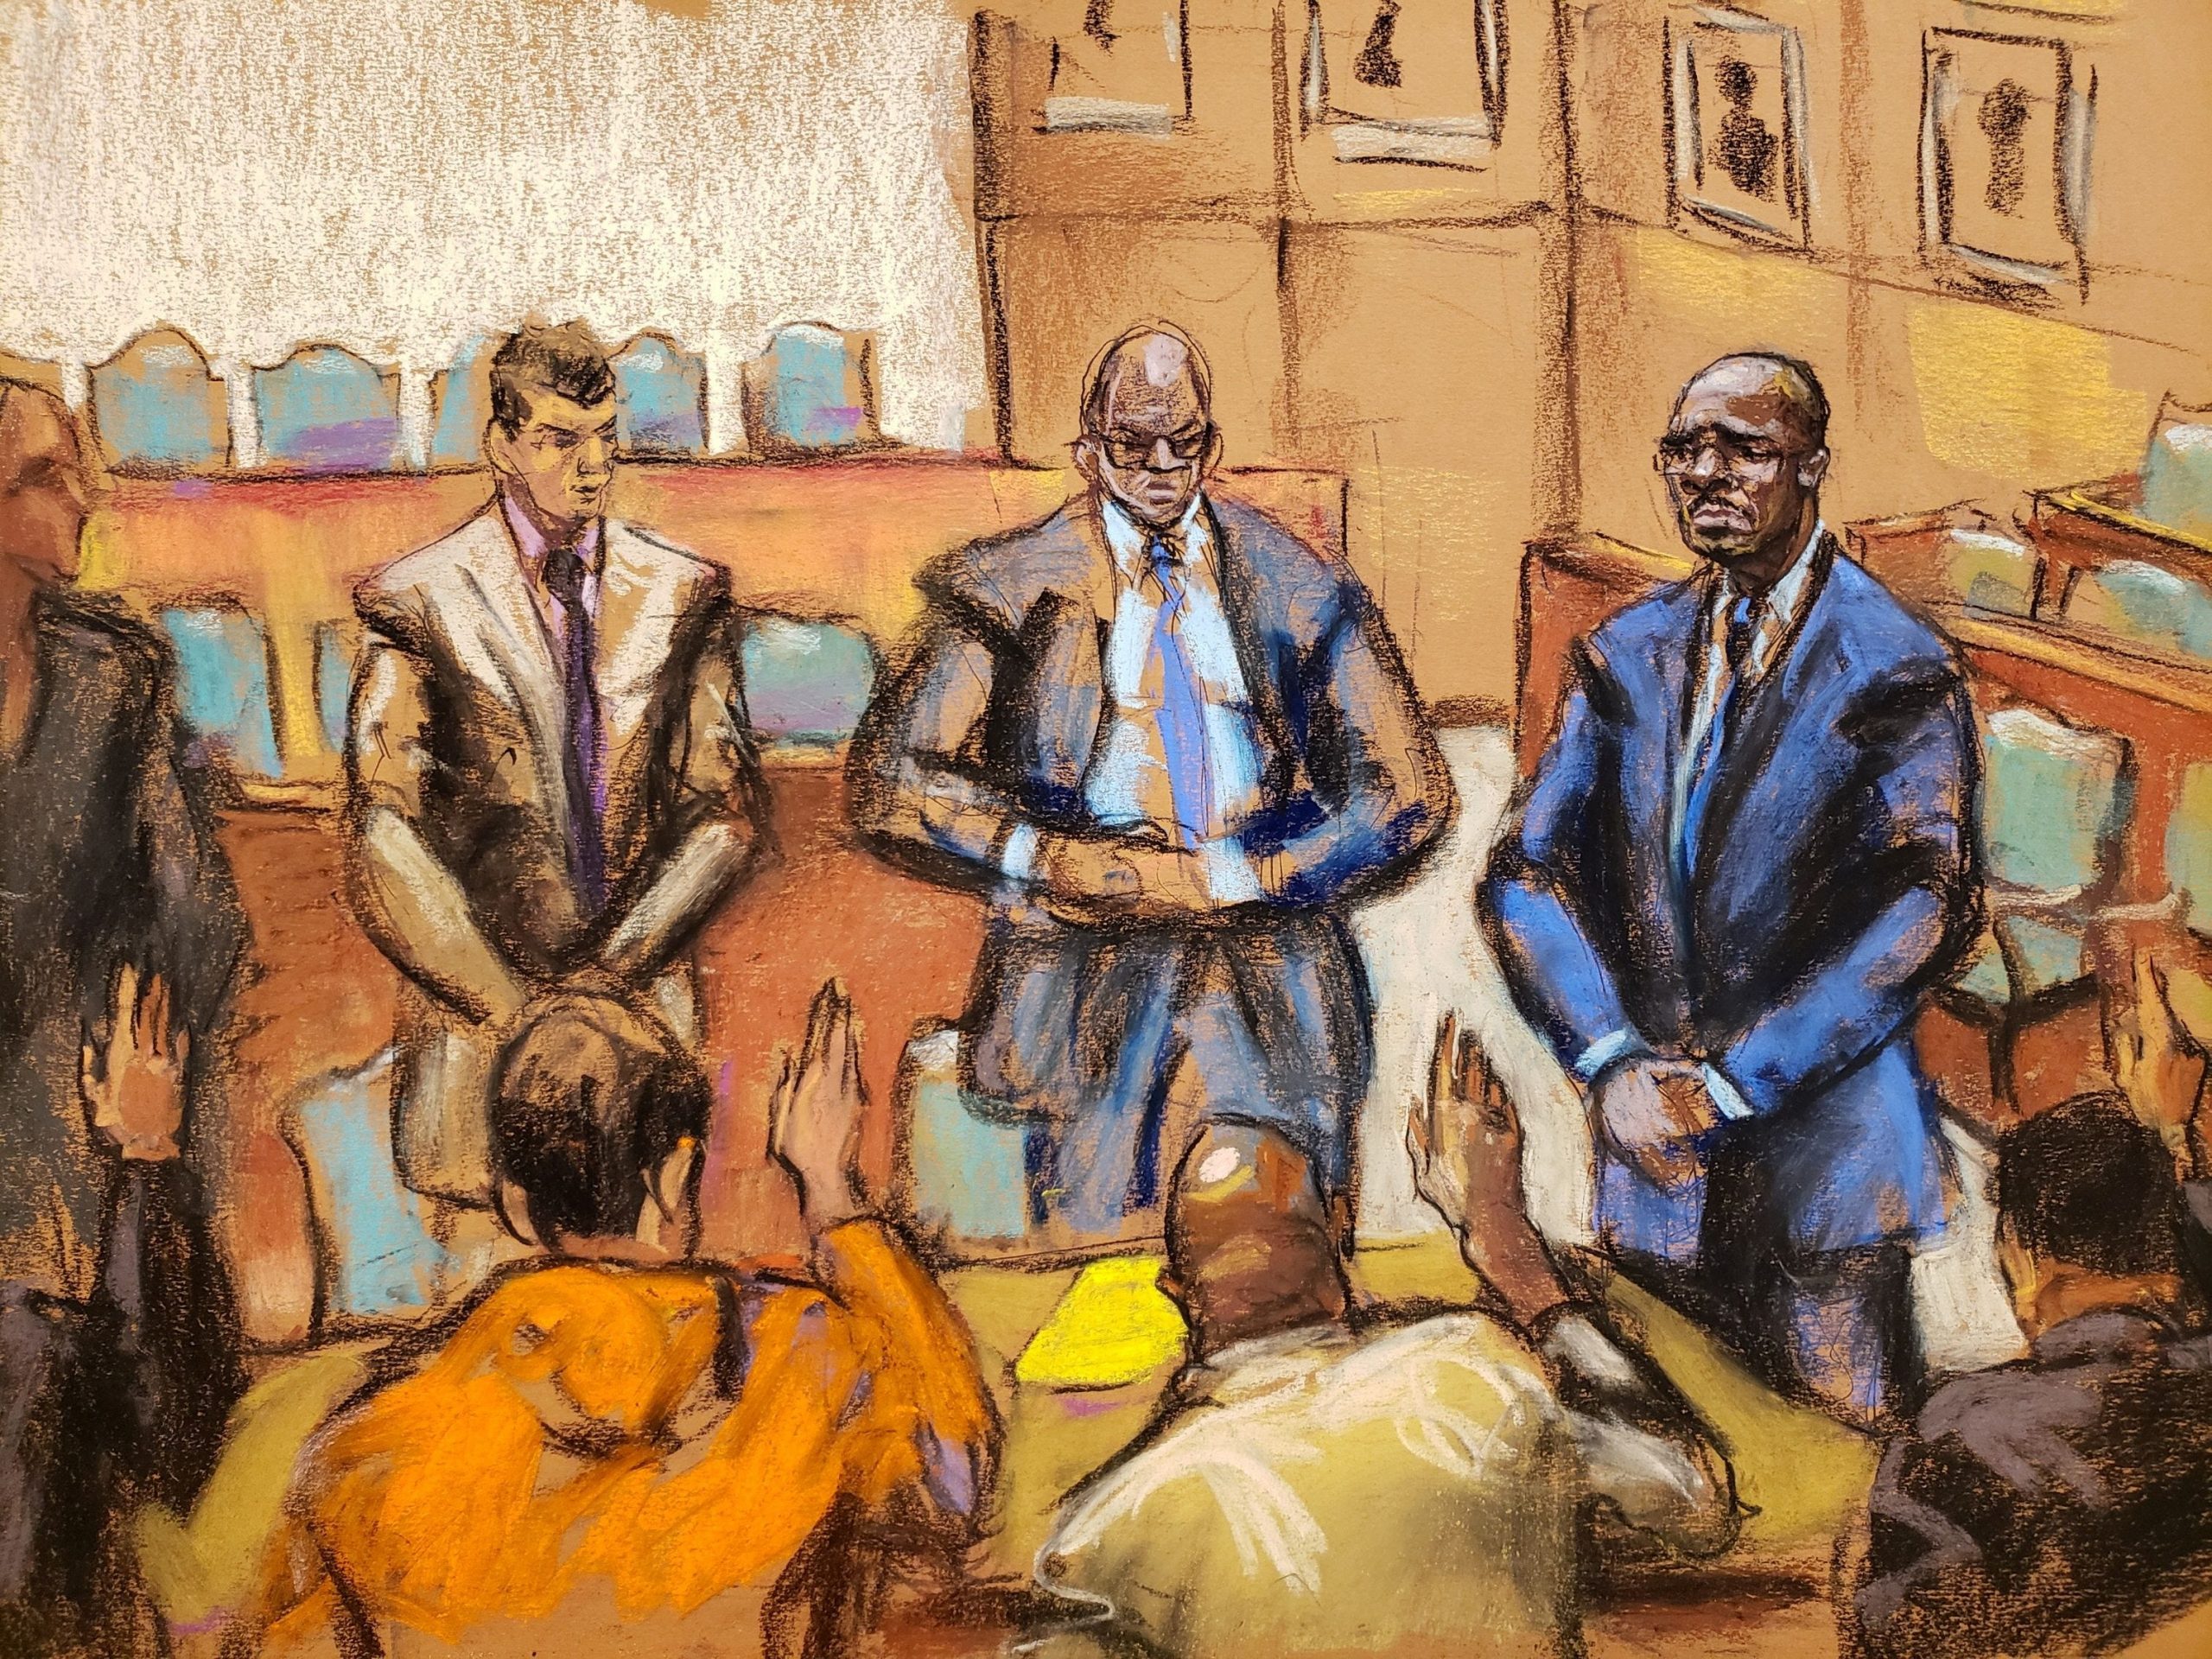 A courtroom sketch of attorneys and R. Kelly in suits standing before prospective jurors who are raising their hands.